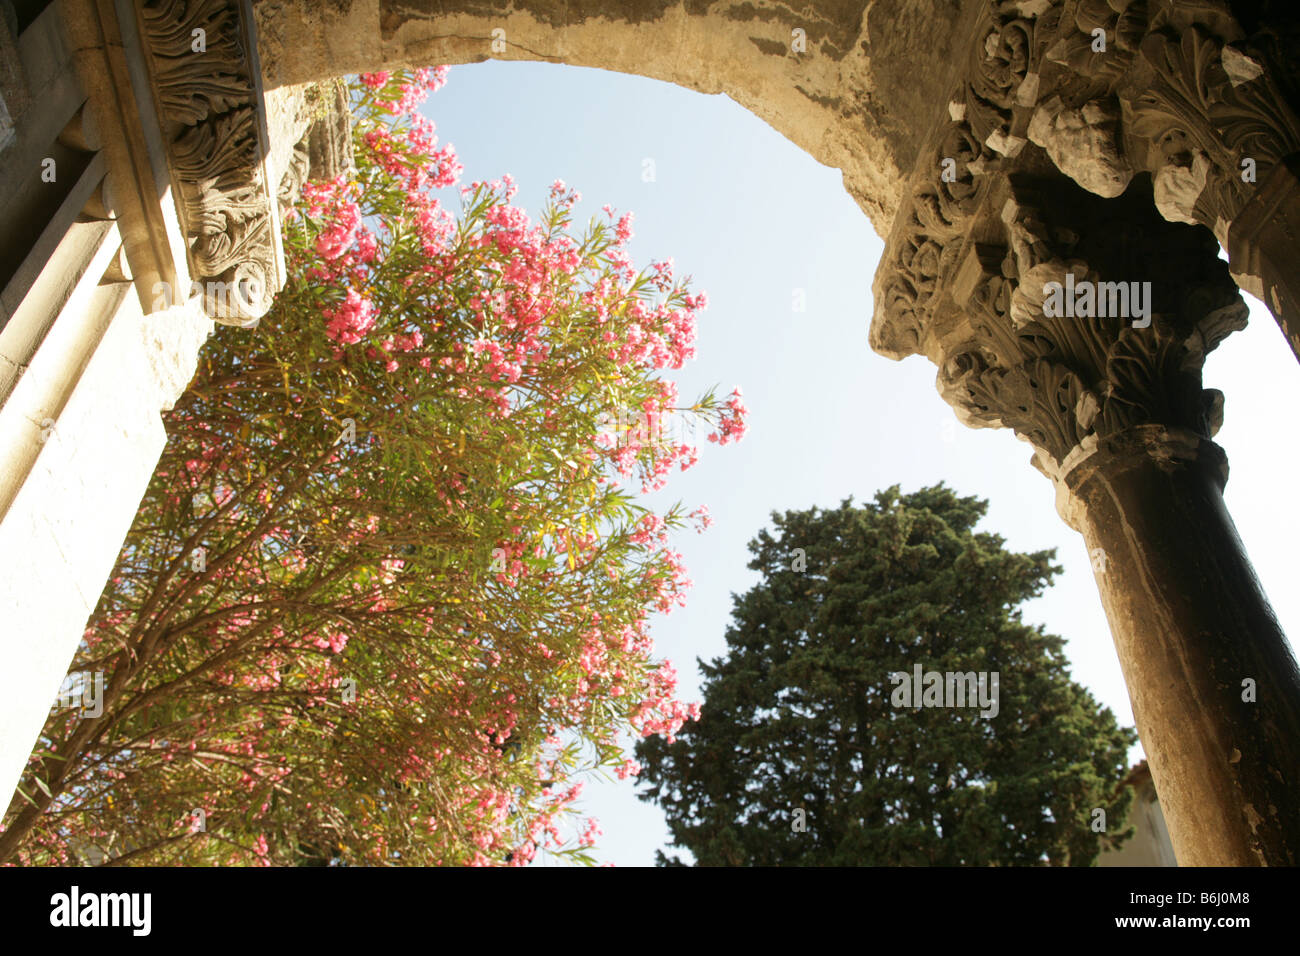 Cloister at the church of St Trophime in Arles, France. Stock Photo